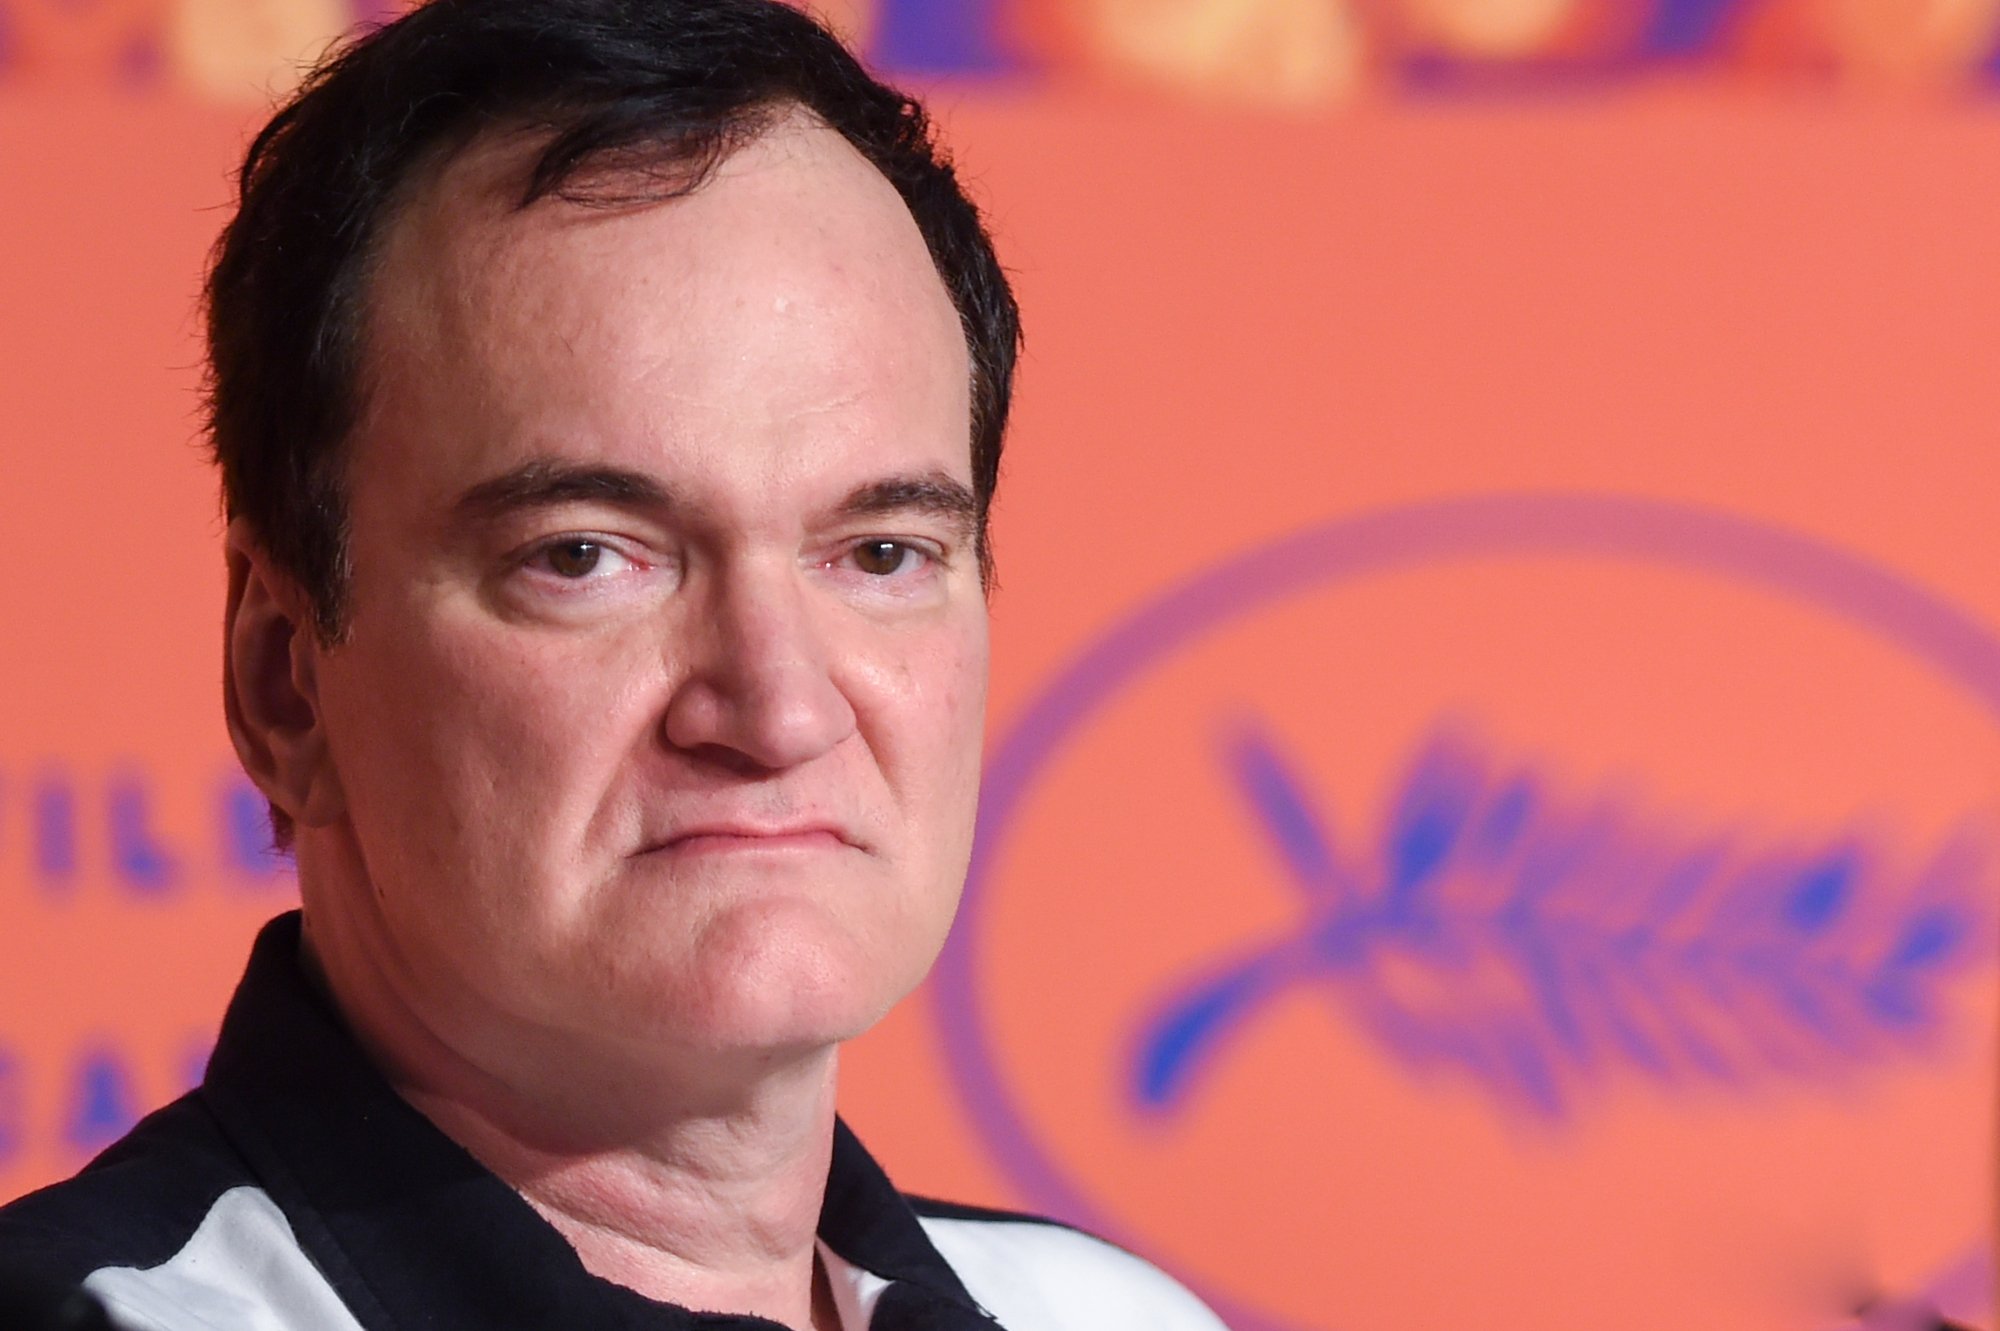 Quentin Tarantino at the 'Once Upon a Time in Hollywood' press conference looking serious with the Cannes logo behind him